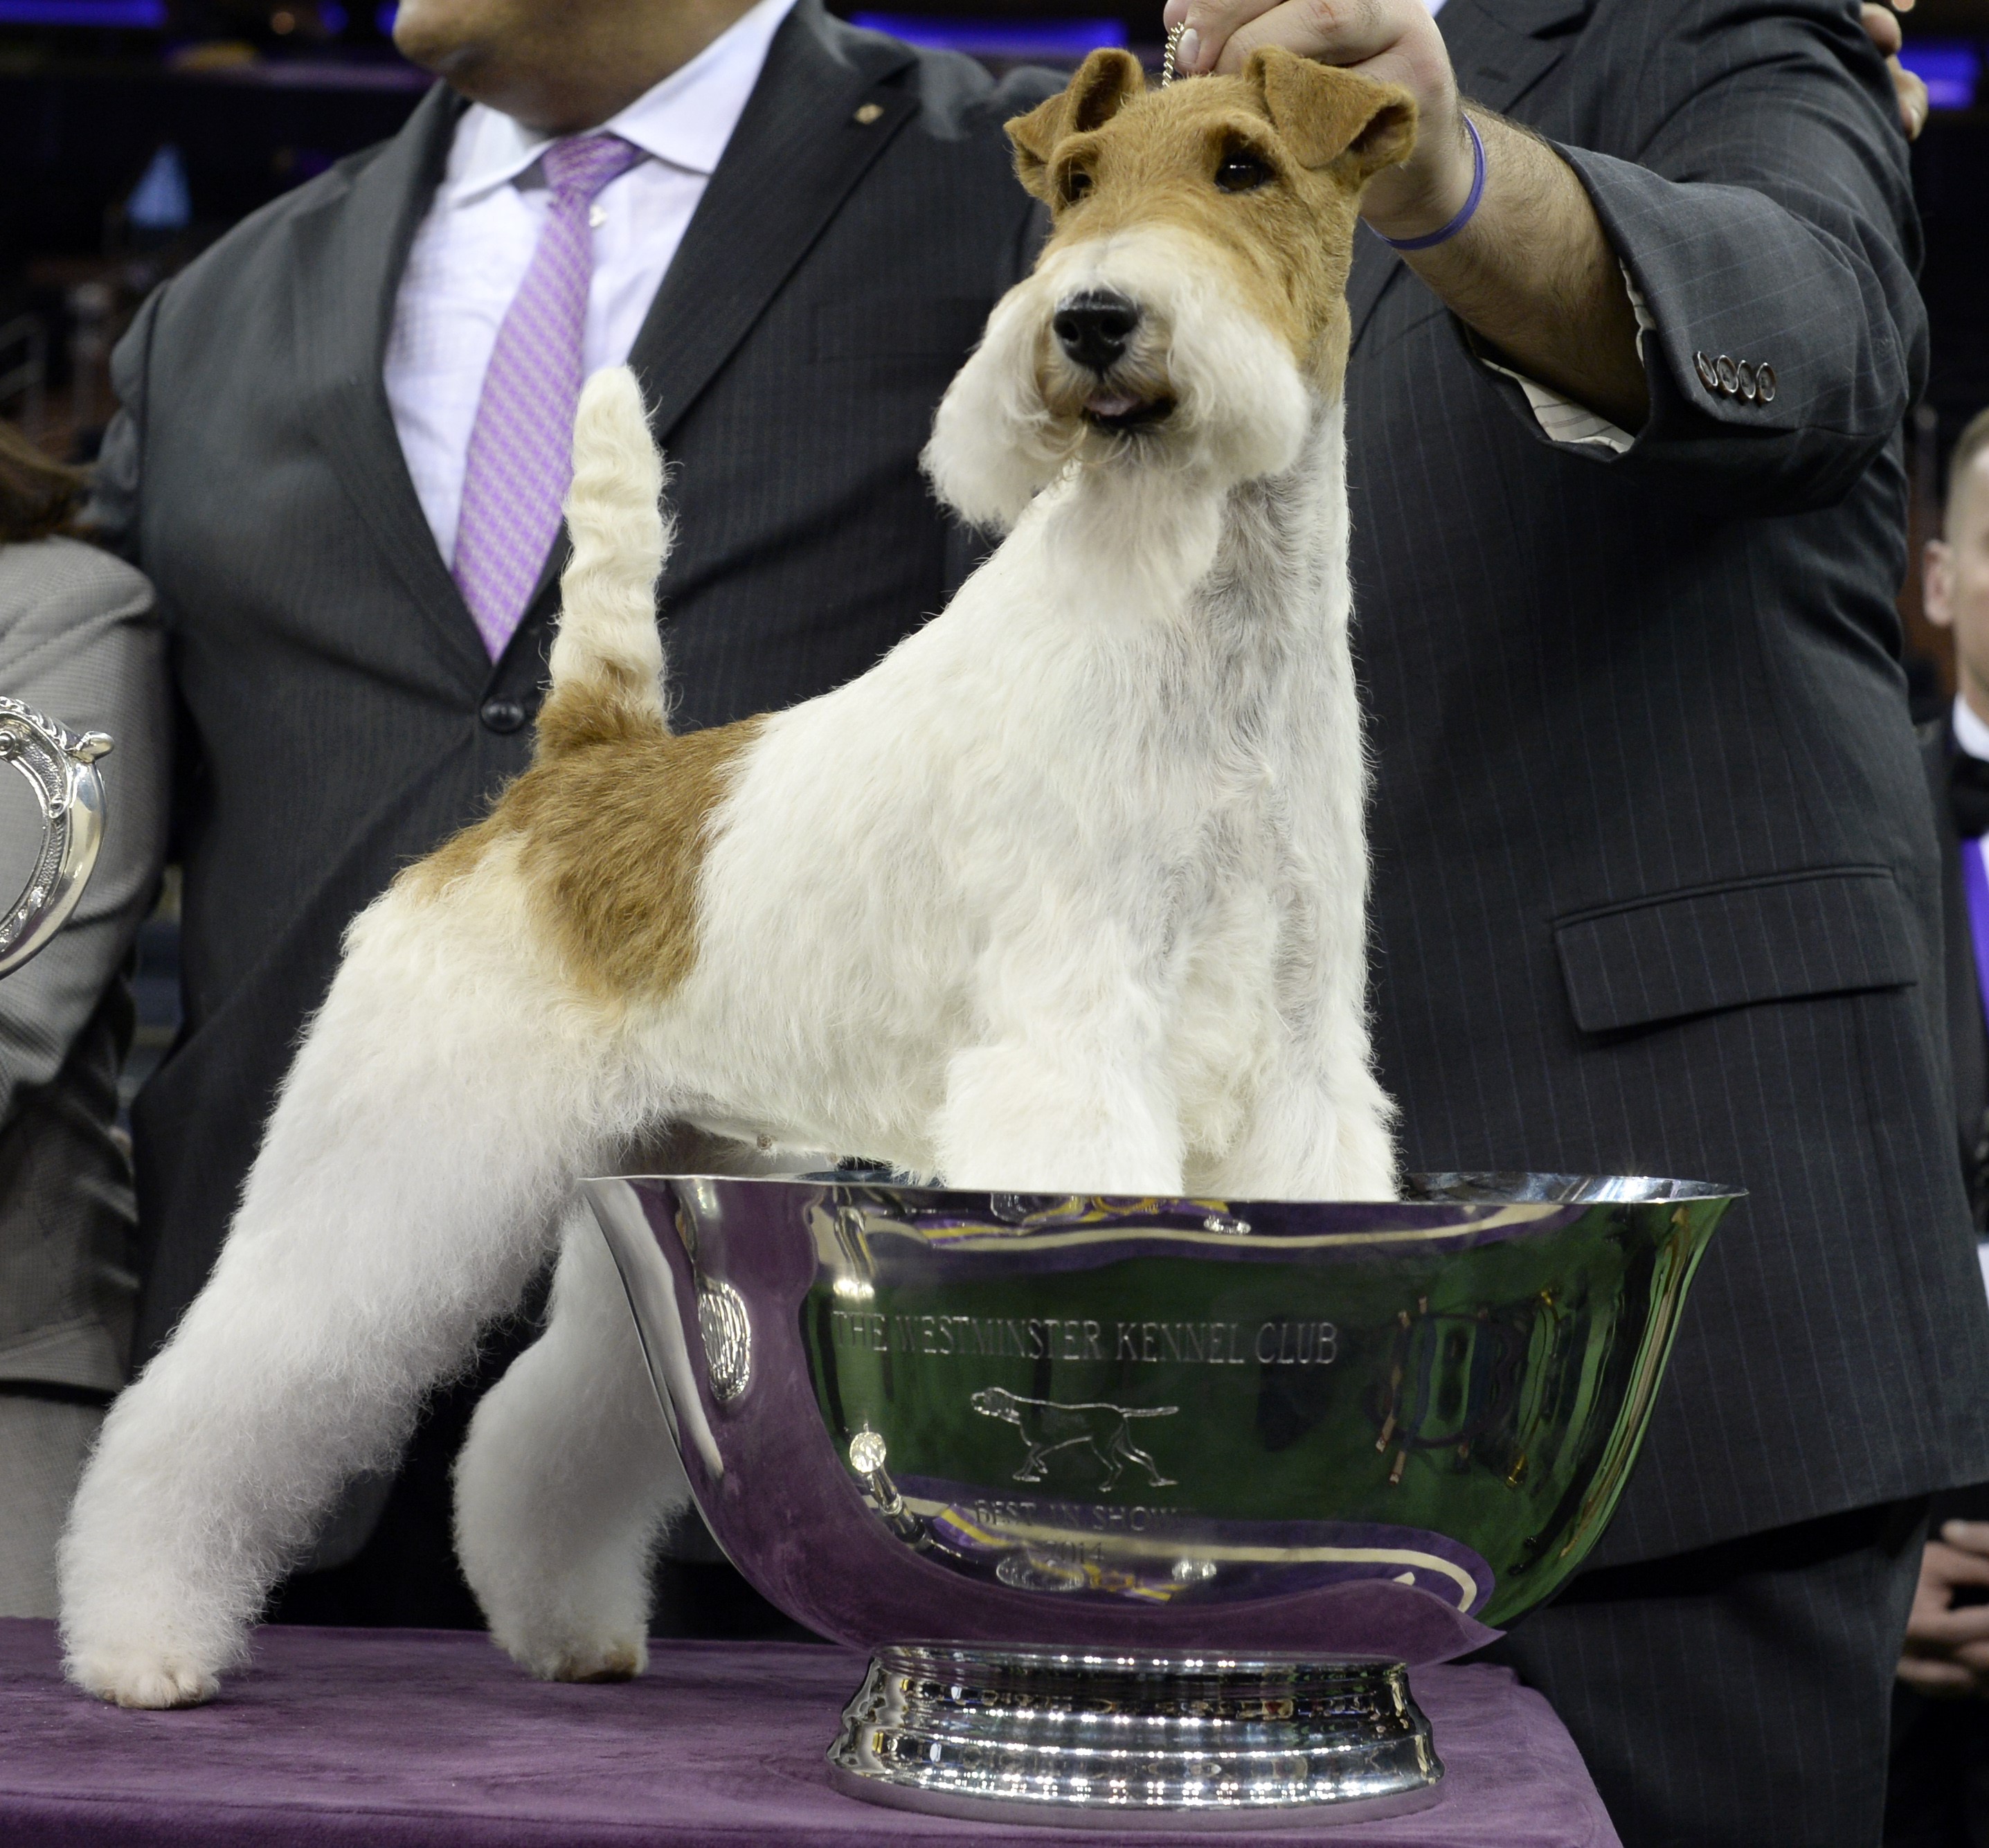 A wire fox terrier named Sky wins "best in show" of the 138th Annual Westminster Kennel Club Dog Show February 11, 2014 at Madison Square Garden. The Westminster Kennel Club Dog Show is a two-day, all-breed benched show that takes place at both Pier 92 & 94 and at Madison Square Garden in New York City . AFP PHOTO / Timothy A. ClaryTIMOTHY A. CLARY/AFP/Getty Images ORG XMIT: 468778841 ORIG FILE ID: 526957427